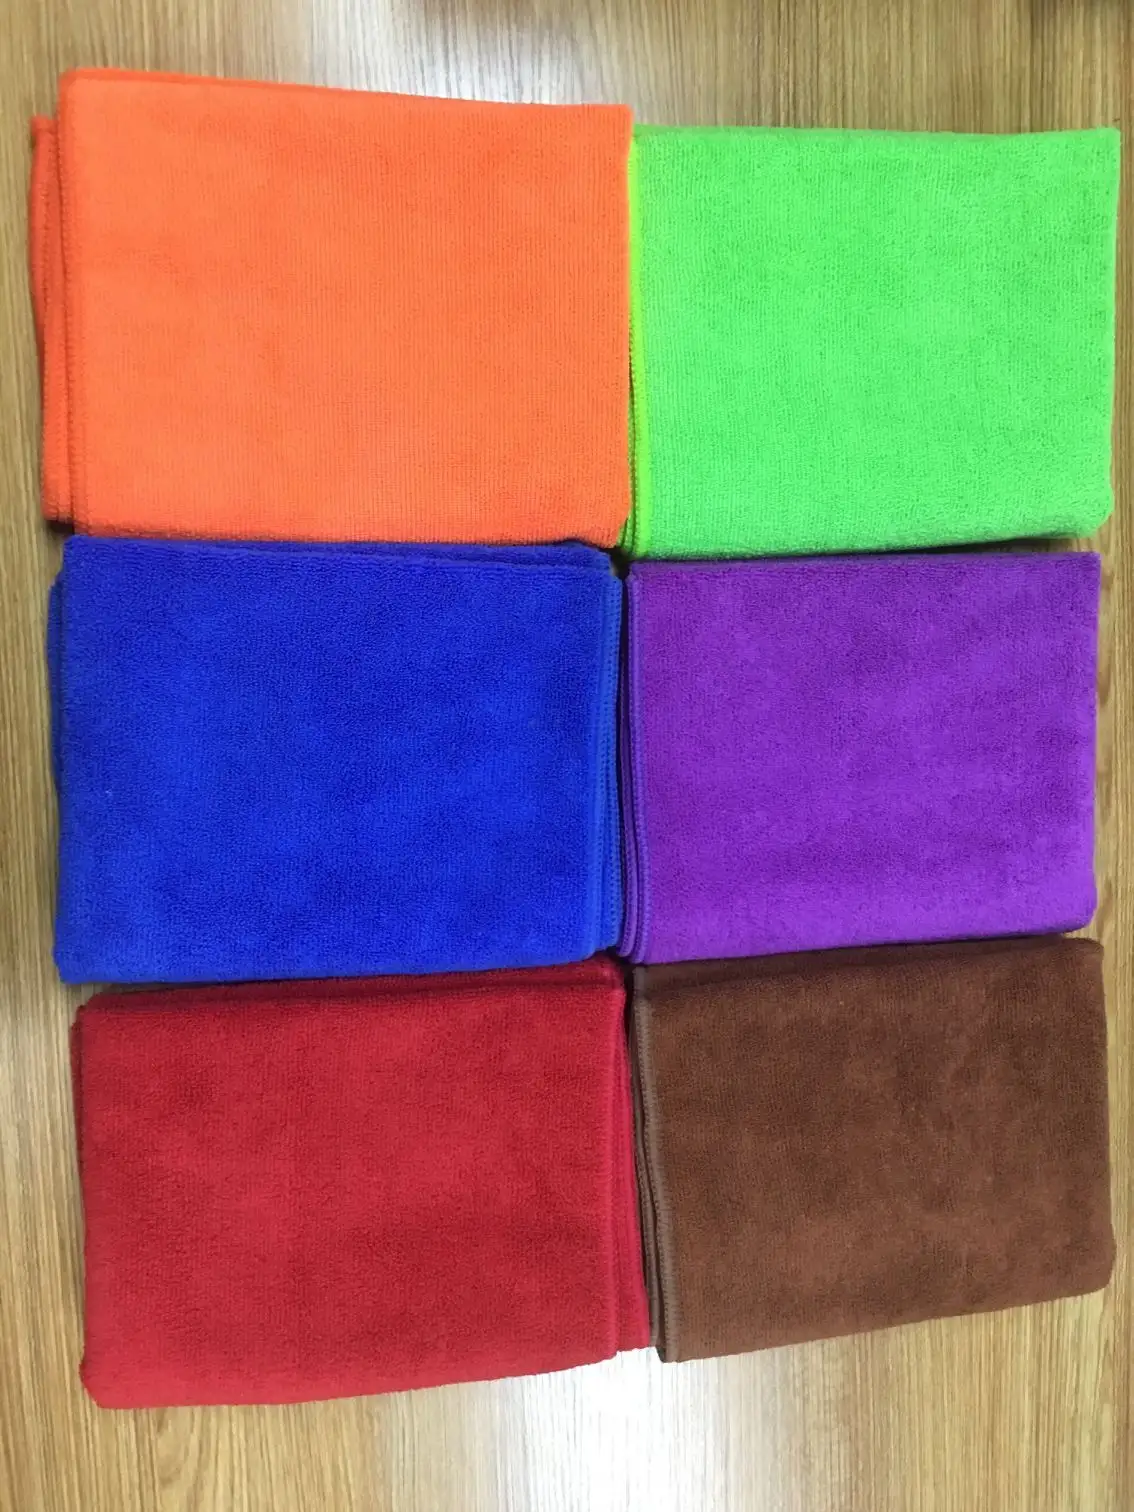 Car Cleaning Cloth High Quality Microfiber Car Wash Towel Eco-Friendly Cleaning Cloth For Vehicles In Green Red Packed Opp Bag Carton